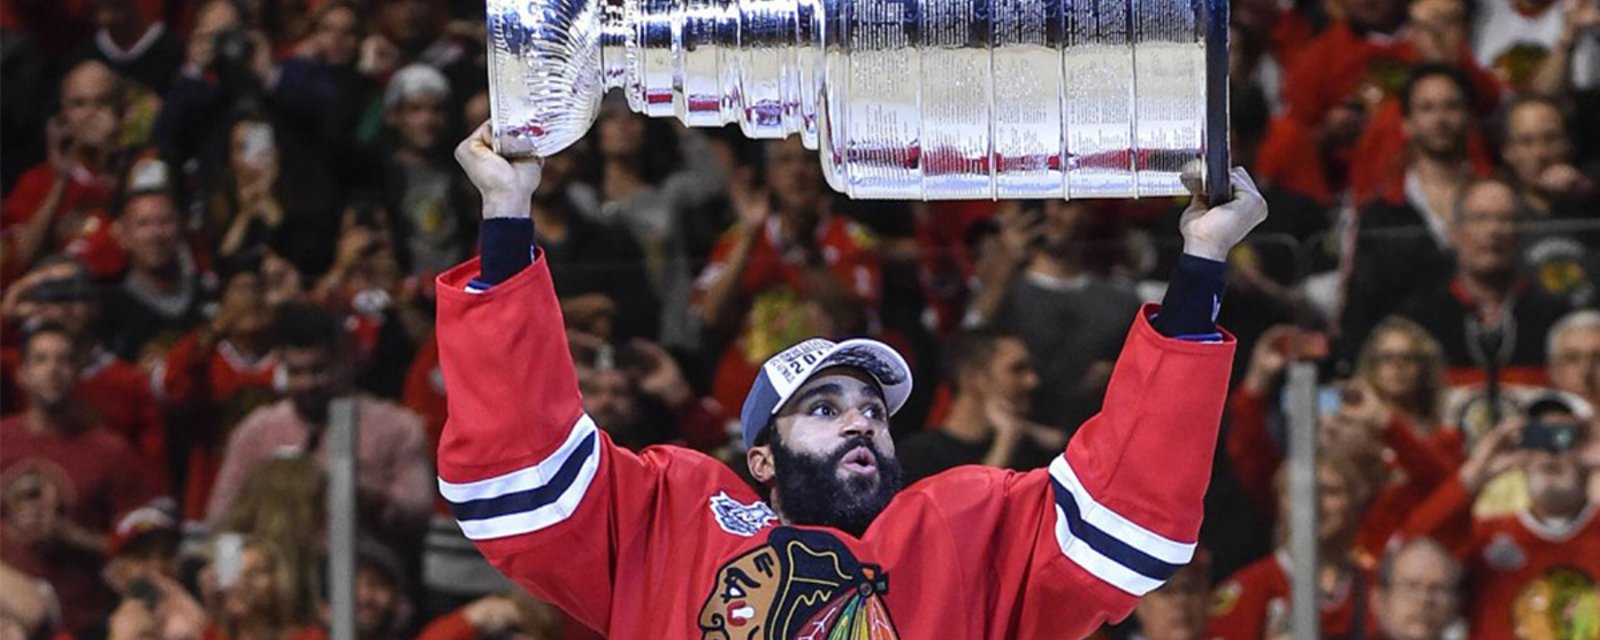 Stanley Cup champion Oduya taking his game to… Thailand!?